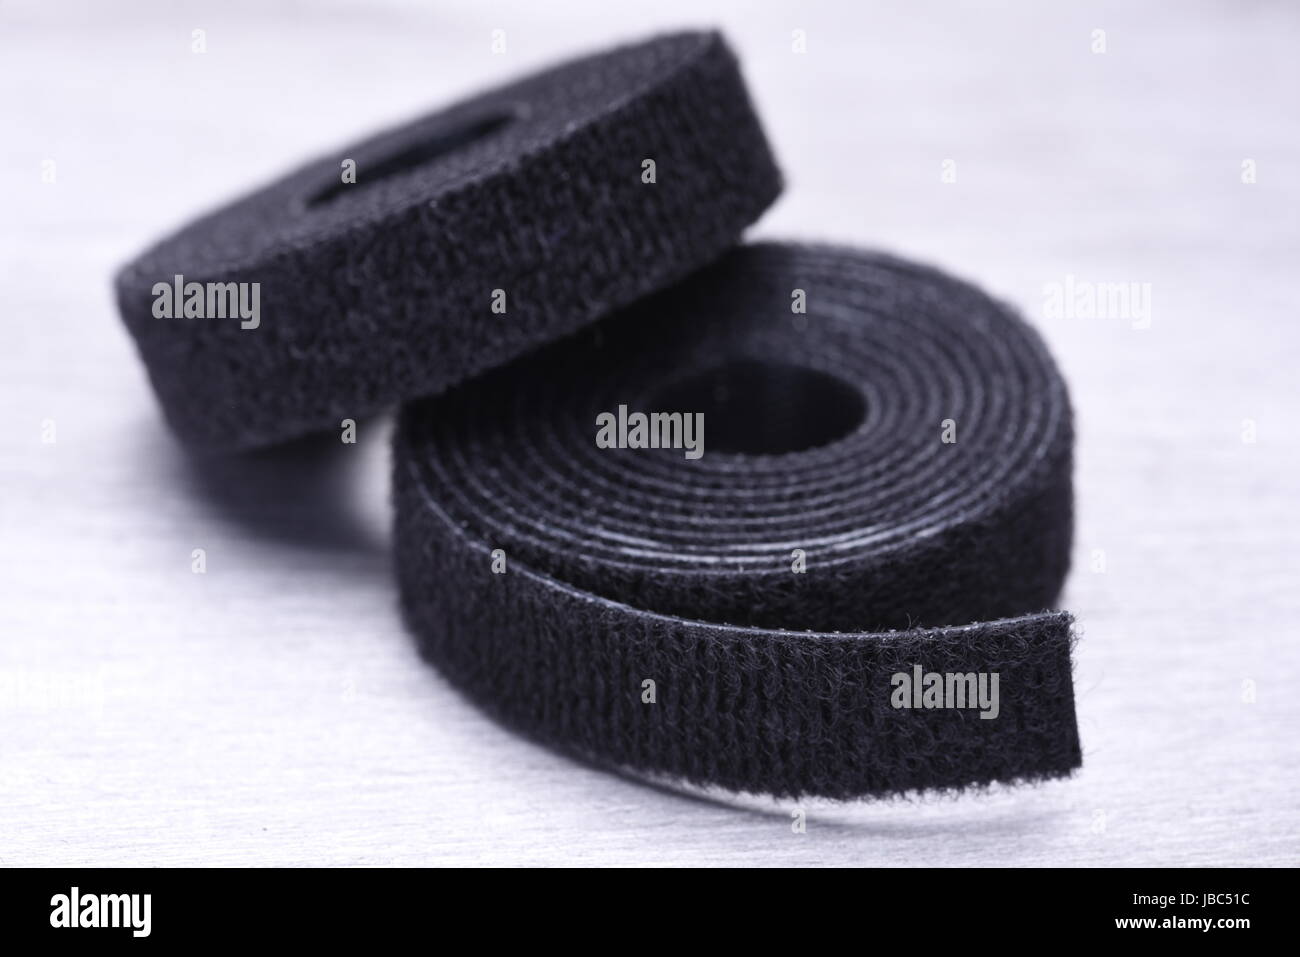 Roll of Velcro Tape on Gray Metal Surface Stock Photo - Alamy